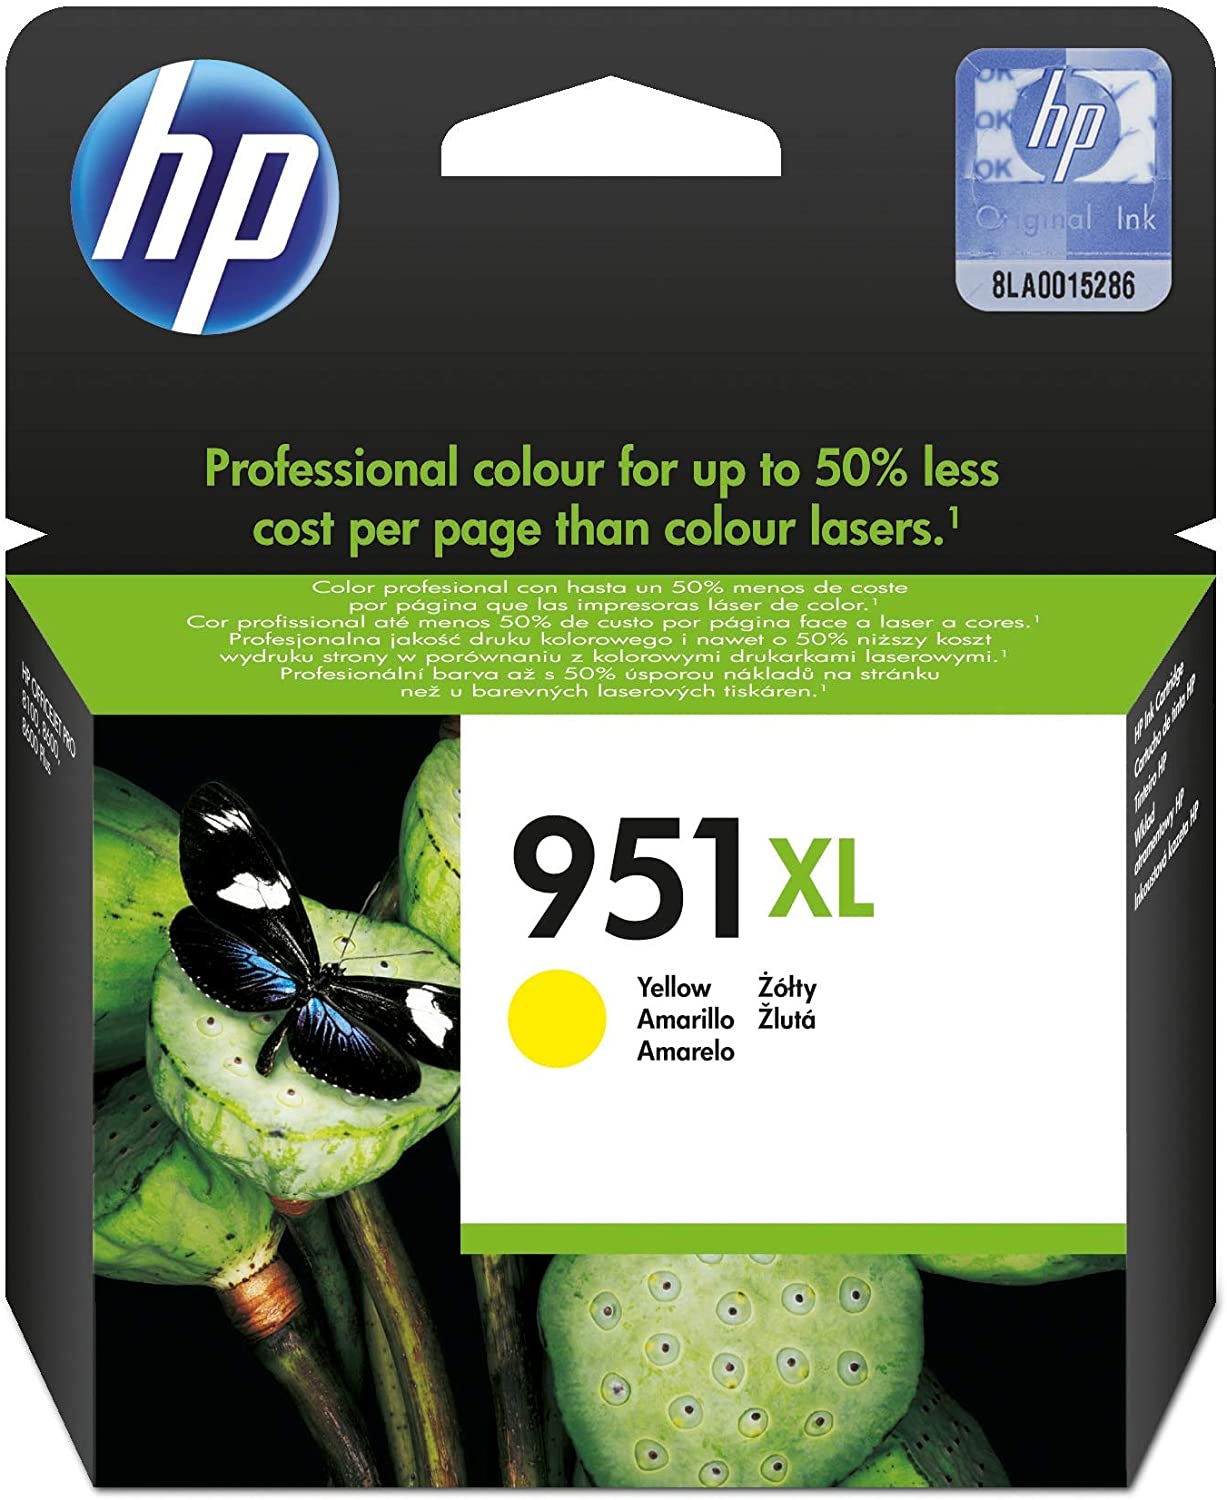 HP 951XL High Yield Yellow Original Ink Cartridge [CN048AE] | Works with HP OfficeJet Pro 251, 276, 8100, 8600, 8610, 8620, 8640 Printers